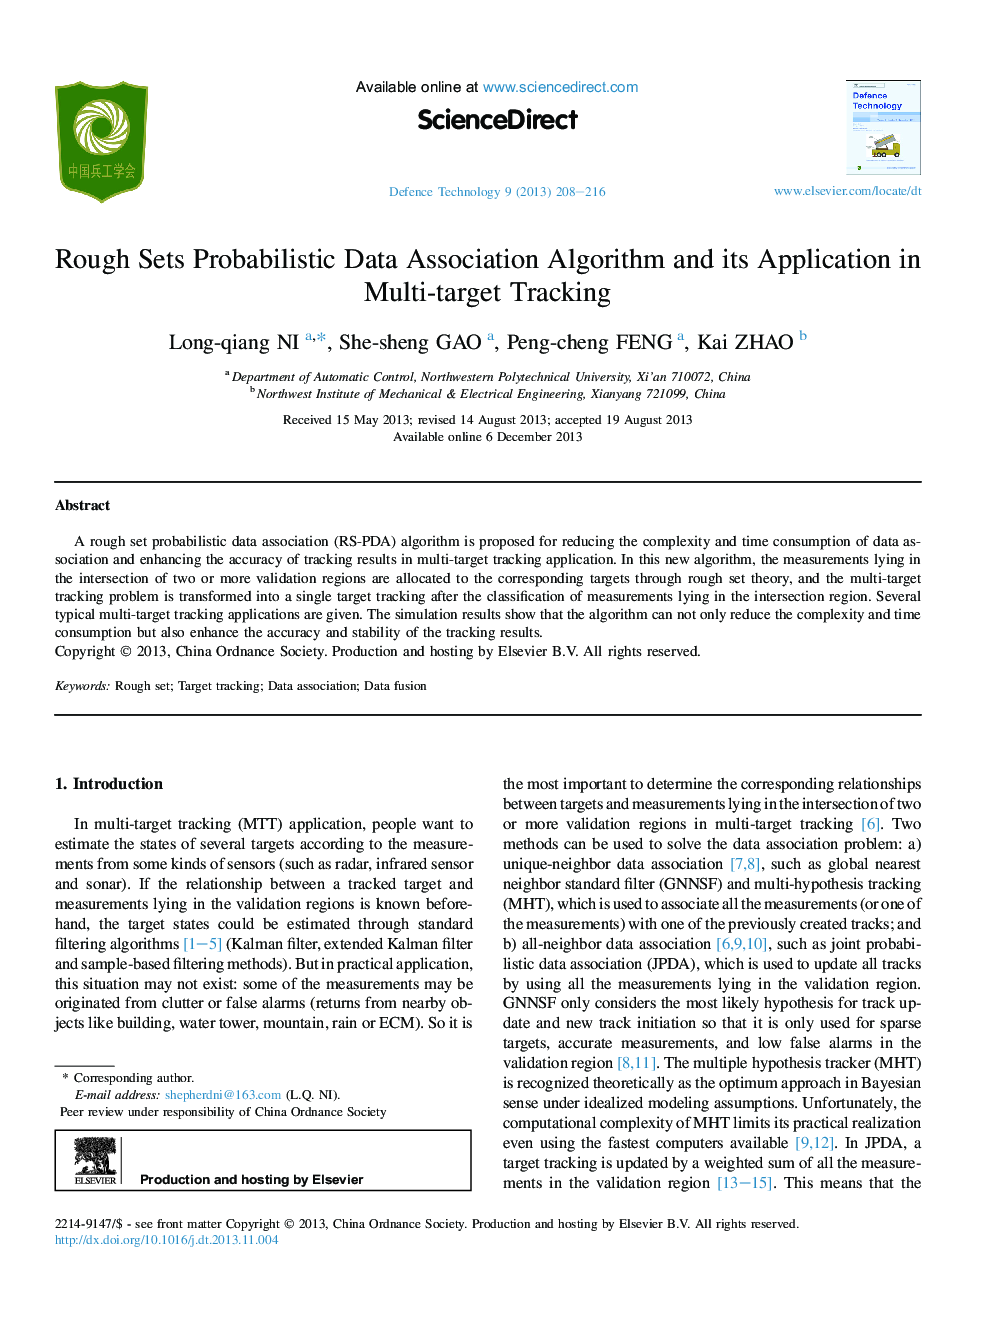 Rough Sets Probabilistic Data Association Algorithm and its Application in Multi-target Tracking 